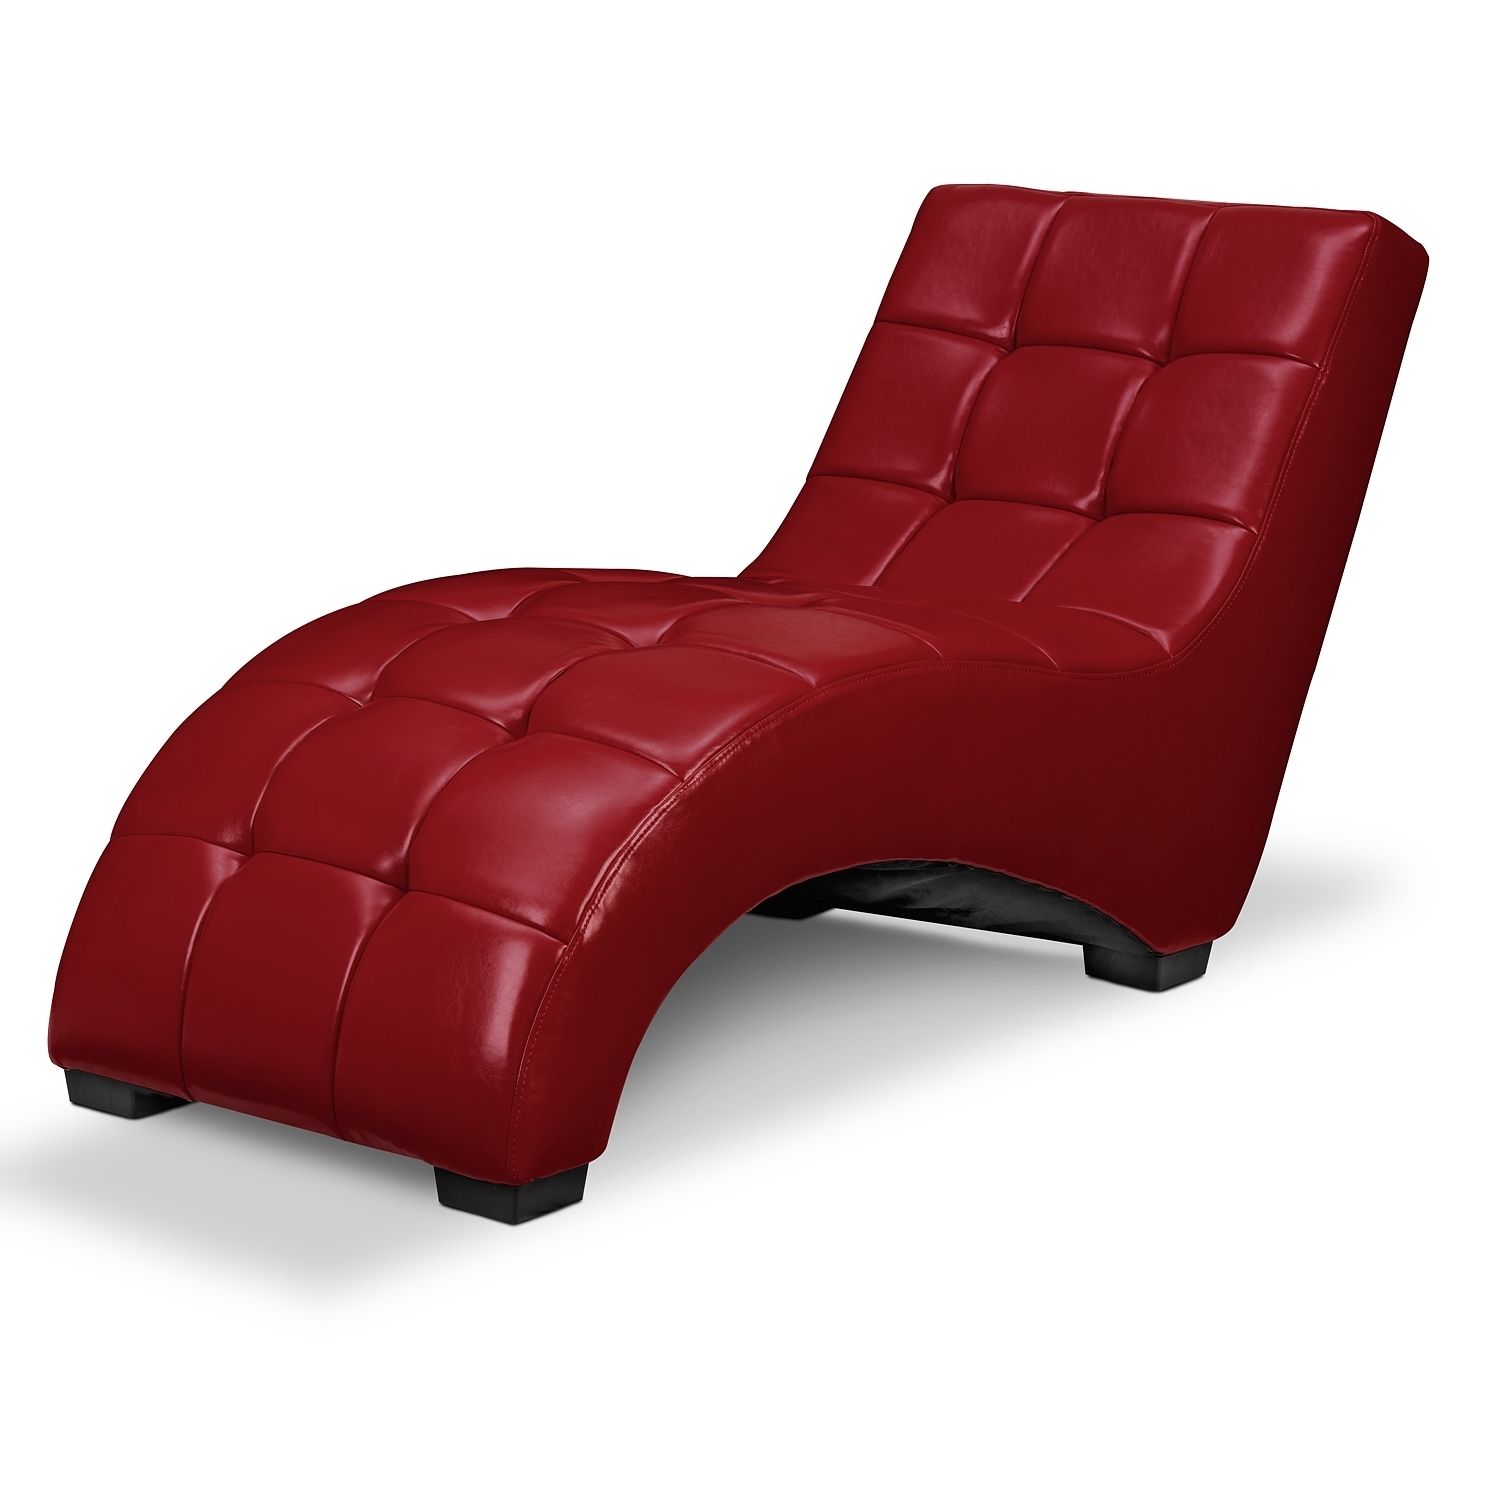 Ideas For Leather Chaise Lounge Design #23847 In Favorite Black Leather Chaise Lounge Chairs (View 12 of 15)